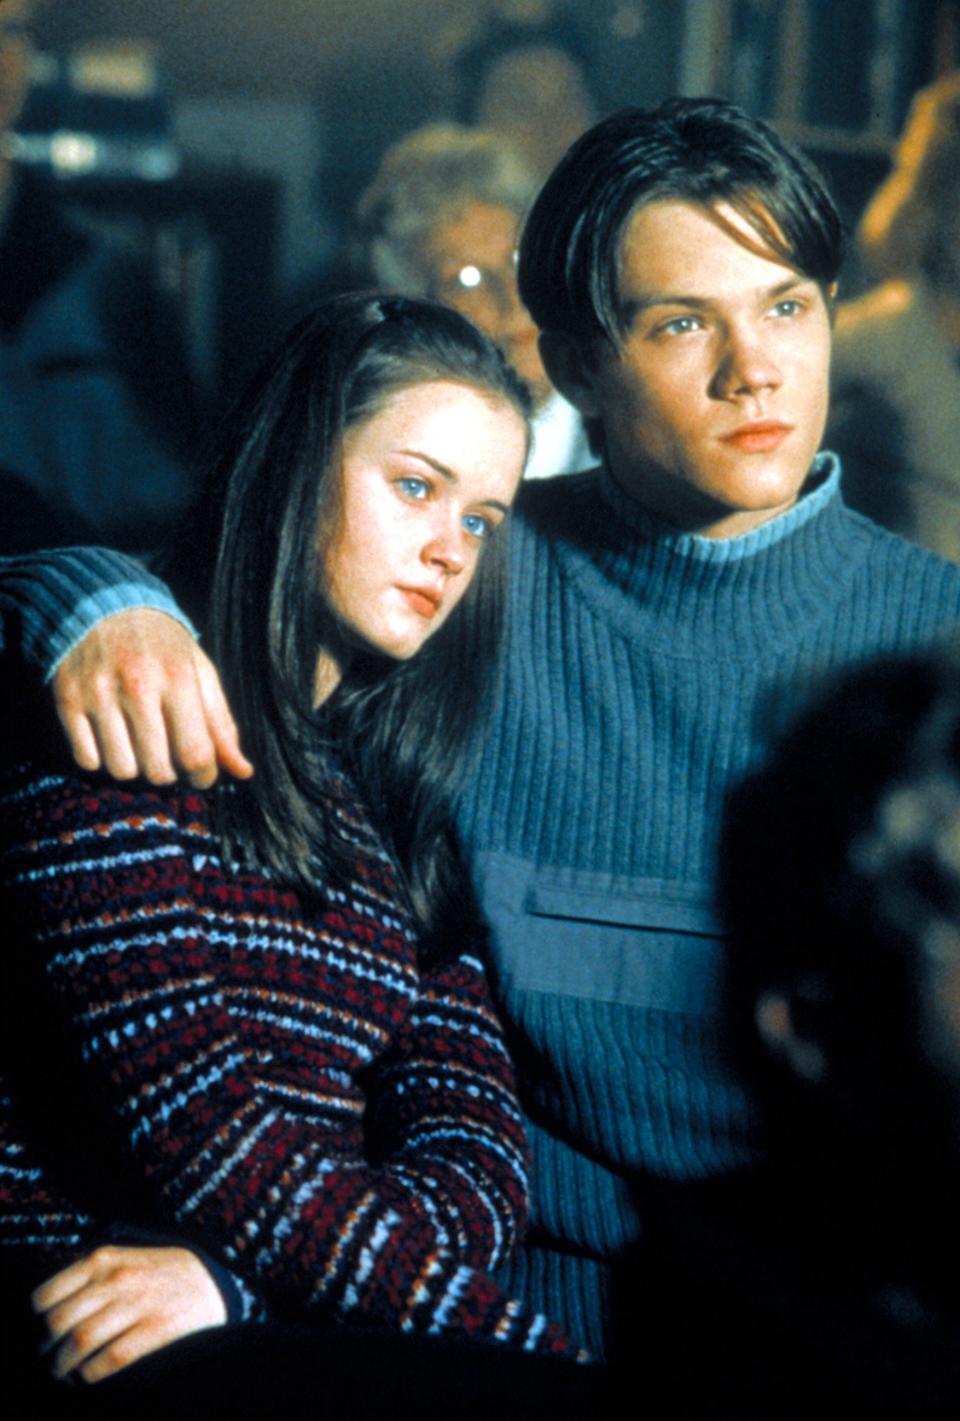 Alexis Bledel as Rory Gilmore and Jared Padalecki as Dean Forester in Gilmore Girls